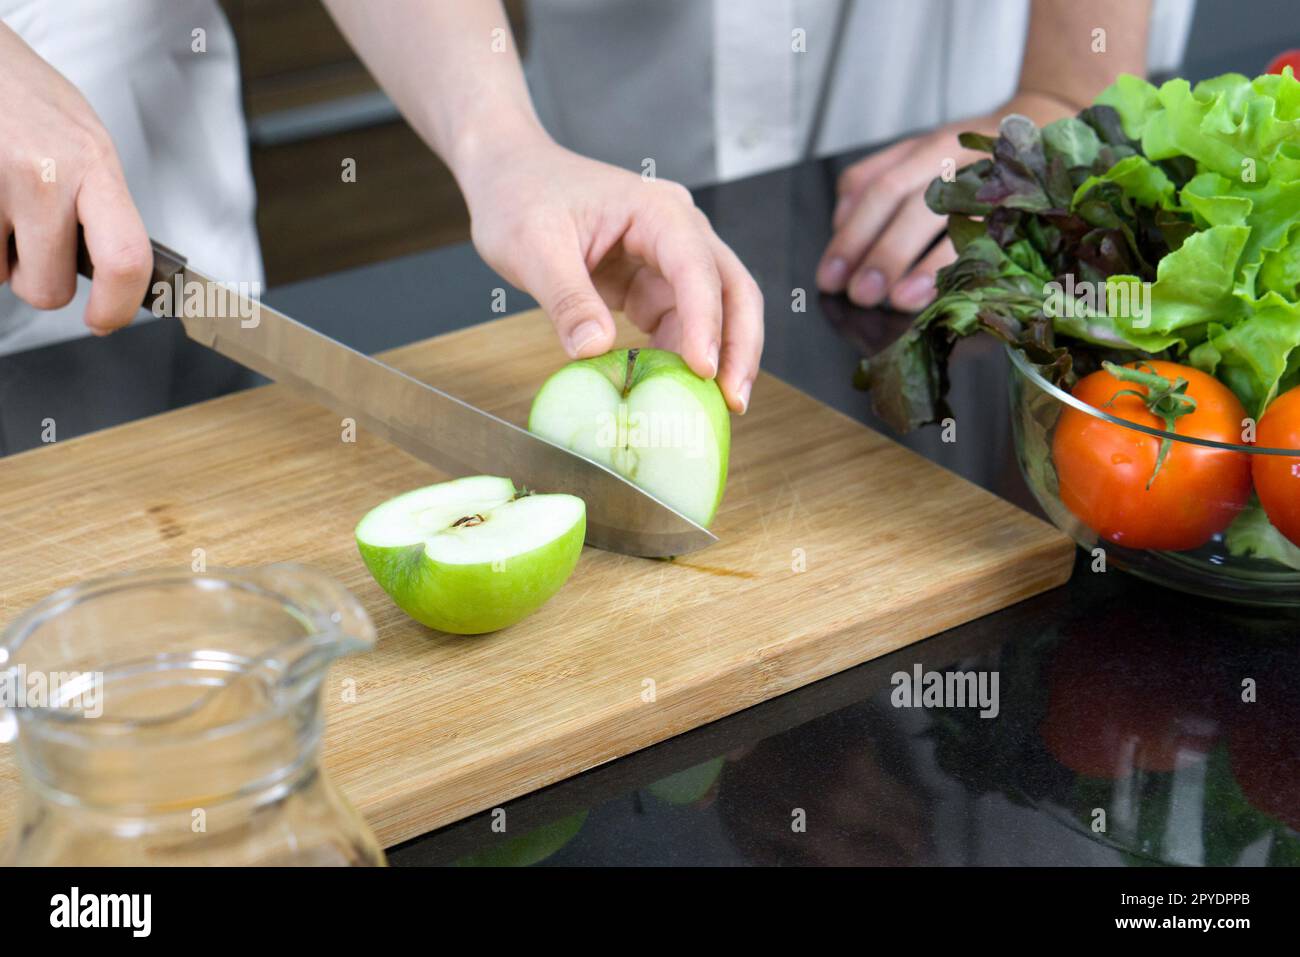 Closeup hand holding knife cutting green apple on a wooden chop board. A glass bowl with a variety of vegetables is placed on the kitchen counter. Stock Photo